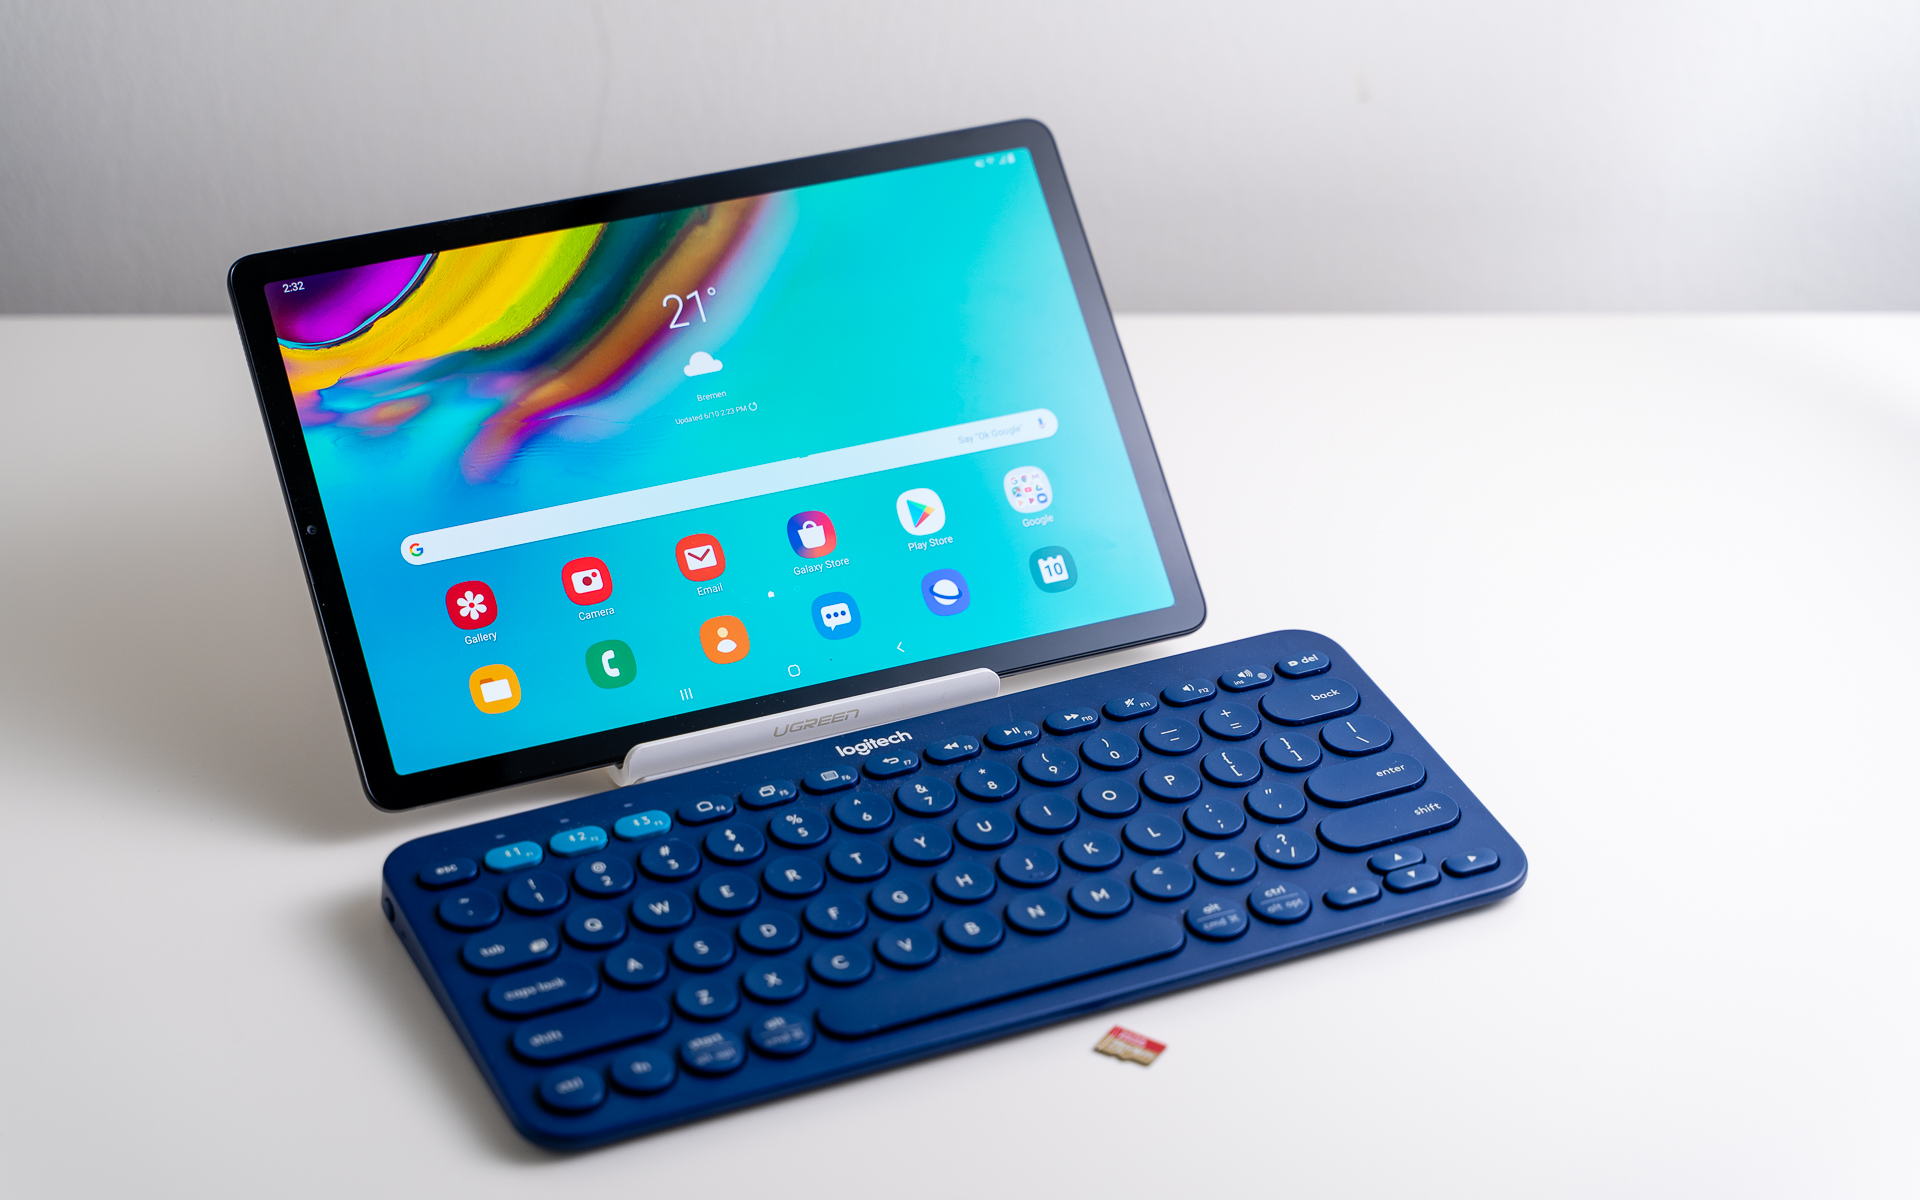 Erase Surroundings build up Samsung Galaxy Tab S5e Accessories: Great Keyboards, Cases & More